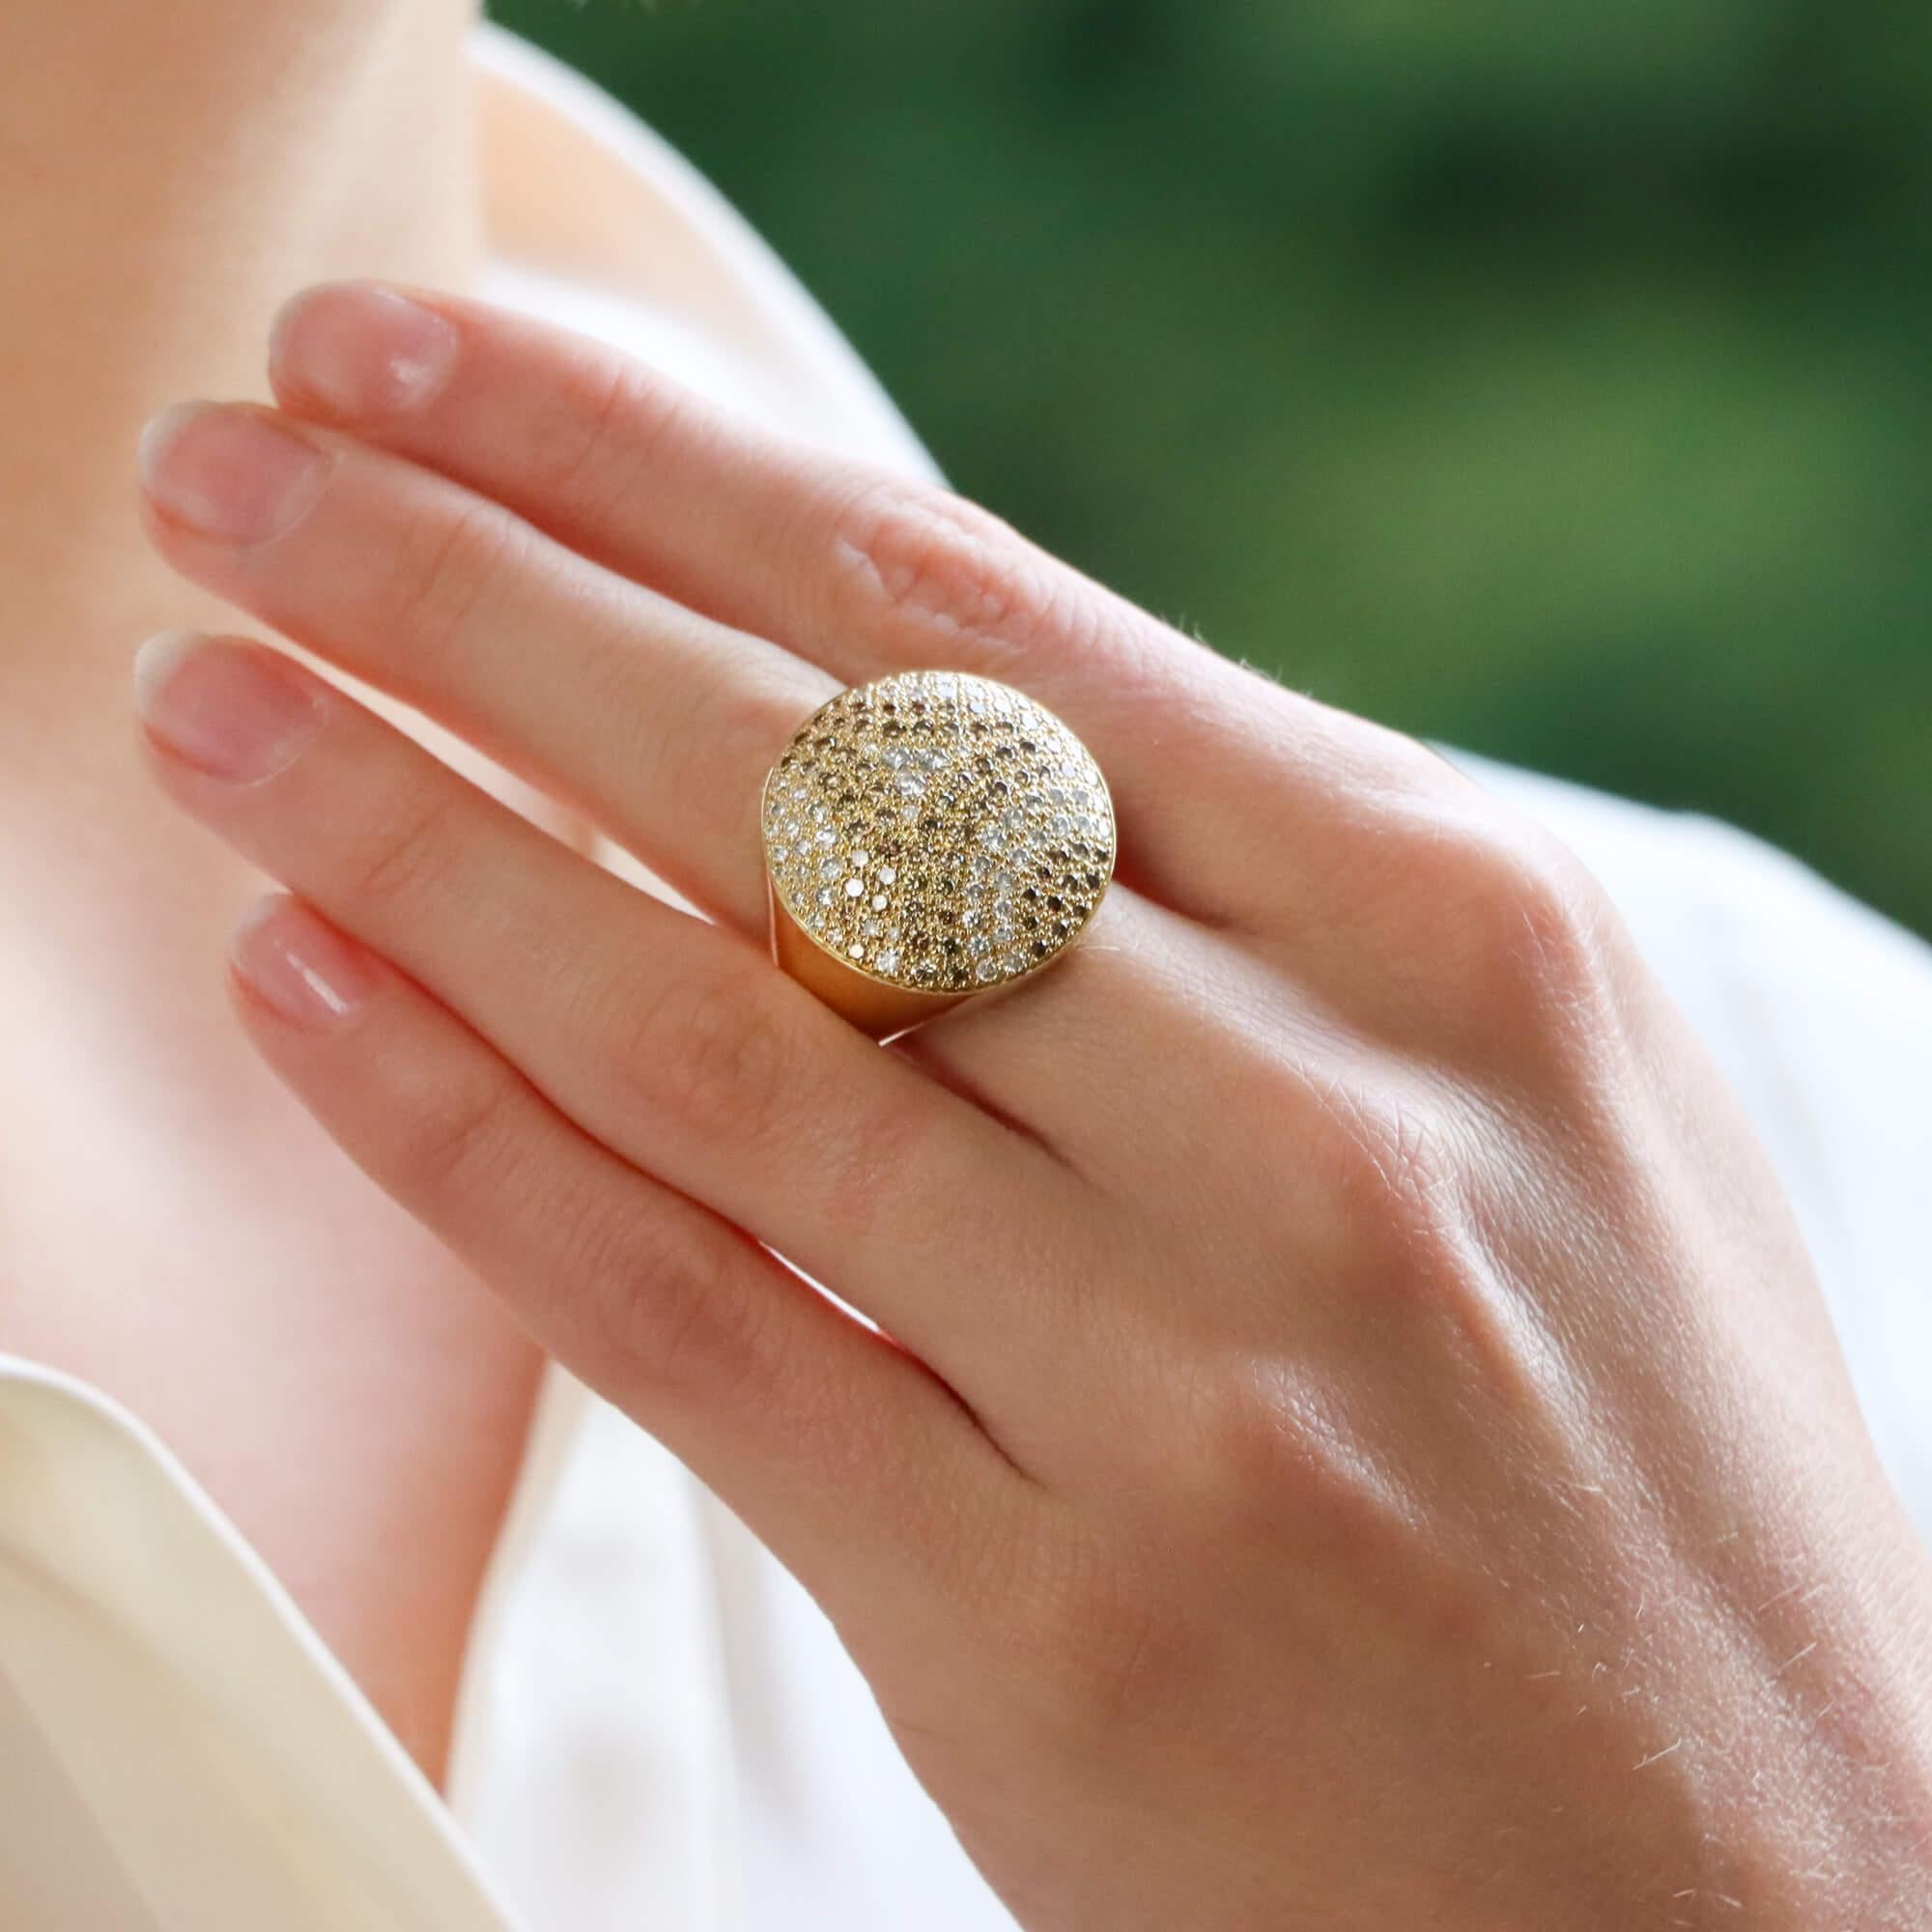 An extremely beautiful Cartier white and cognac diamond cocktail ring, from the Jeton Sauvage collection, set in 18k yellow gold.

This unique looking piece is pave set throughout with 52 white and 68 cognac round brilliant cut diamonds which create